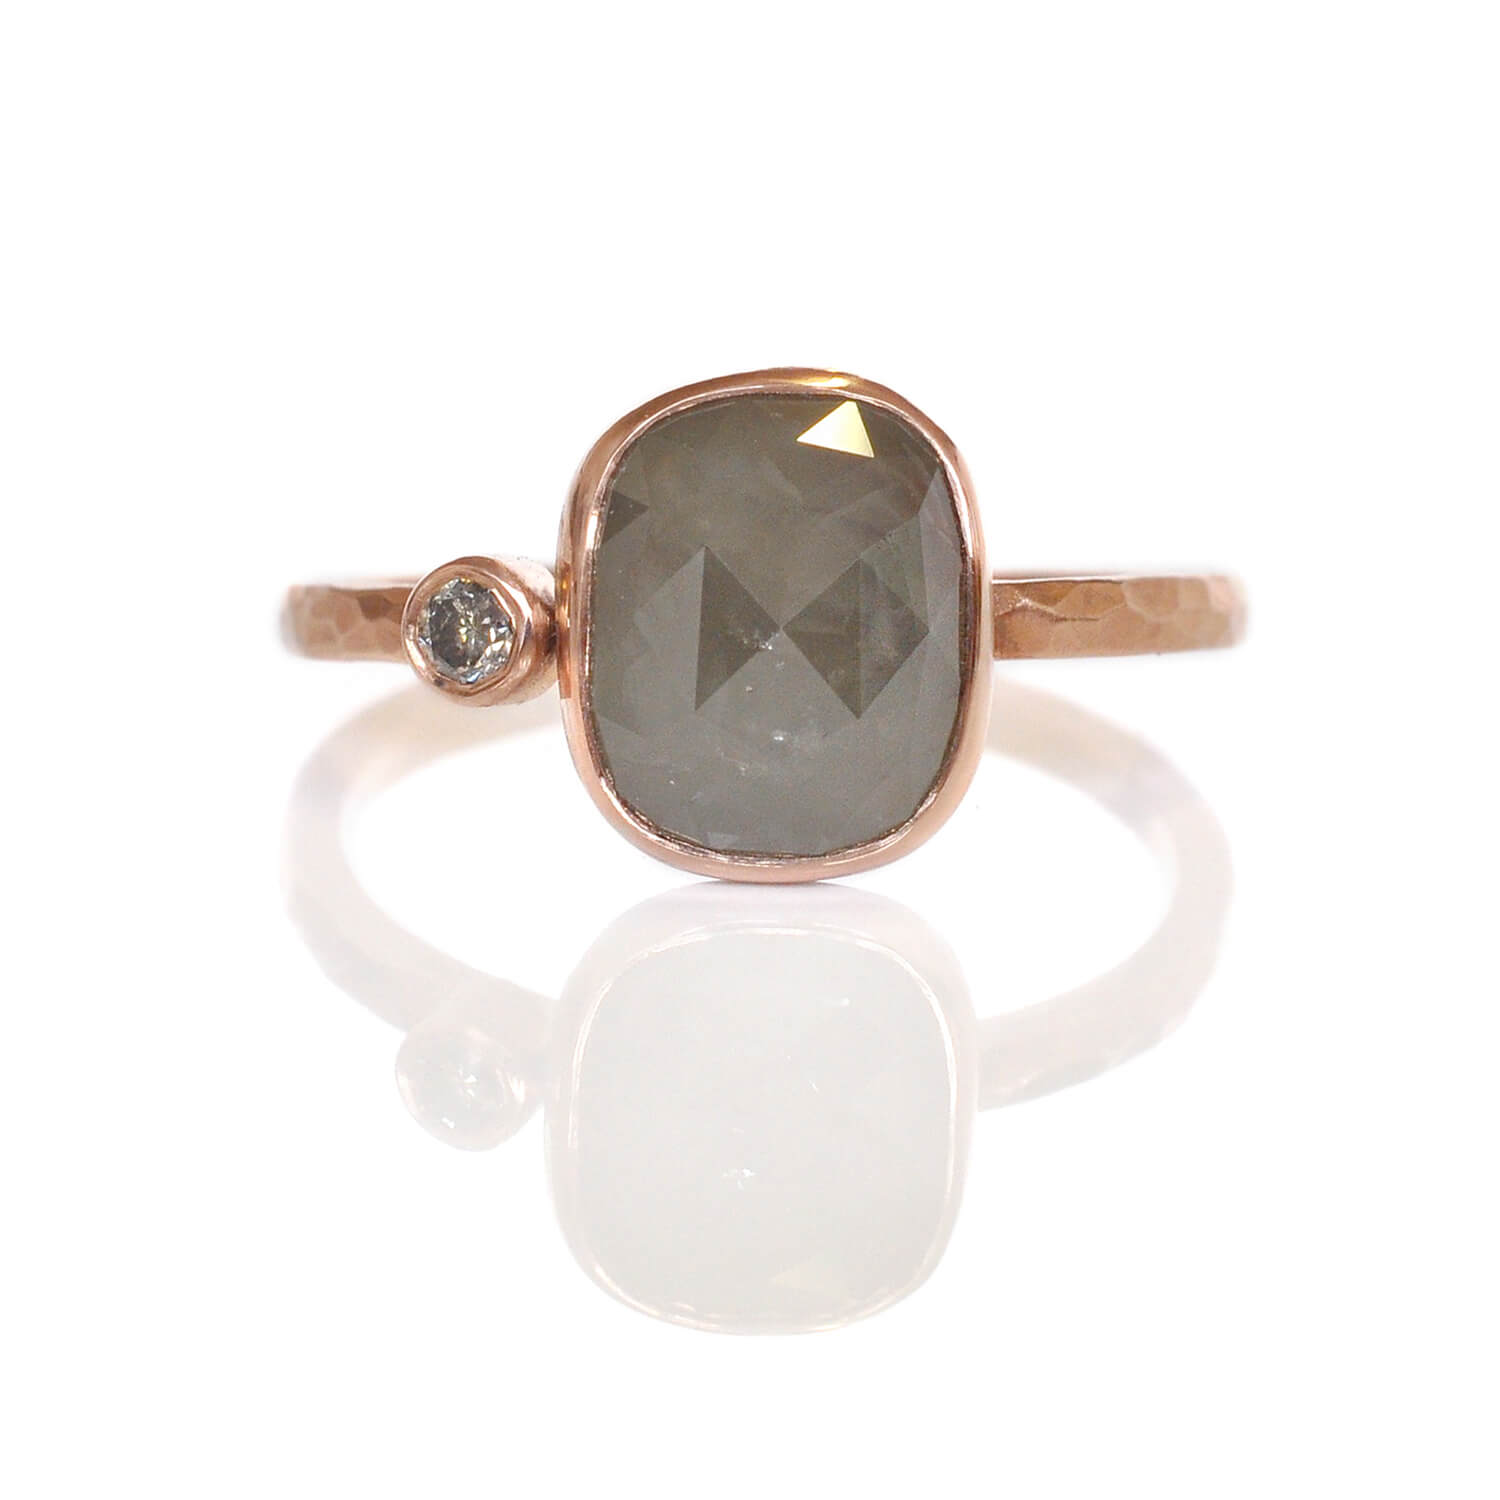 Modern engagement ring with gray rose cut diamond in red gold and a champagne diamond accent. Handmade by EC Design Jewelry in Minneapolis, MN using recycled metal and conflict-free stones.